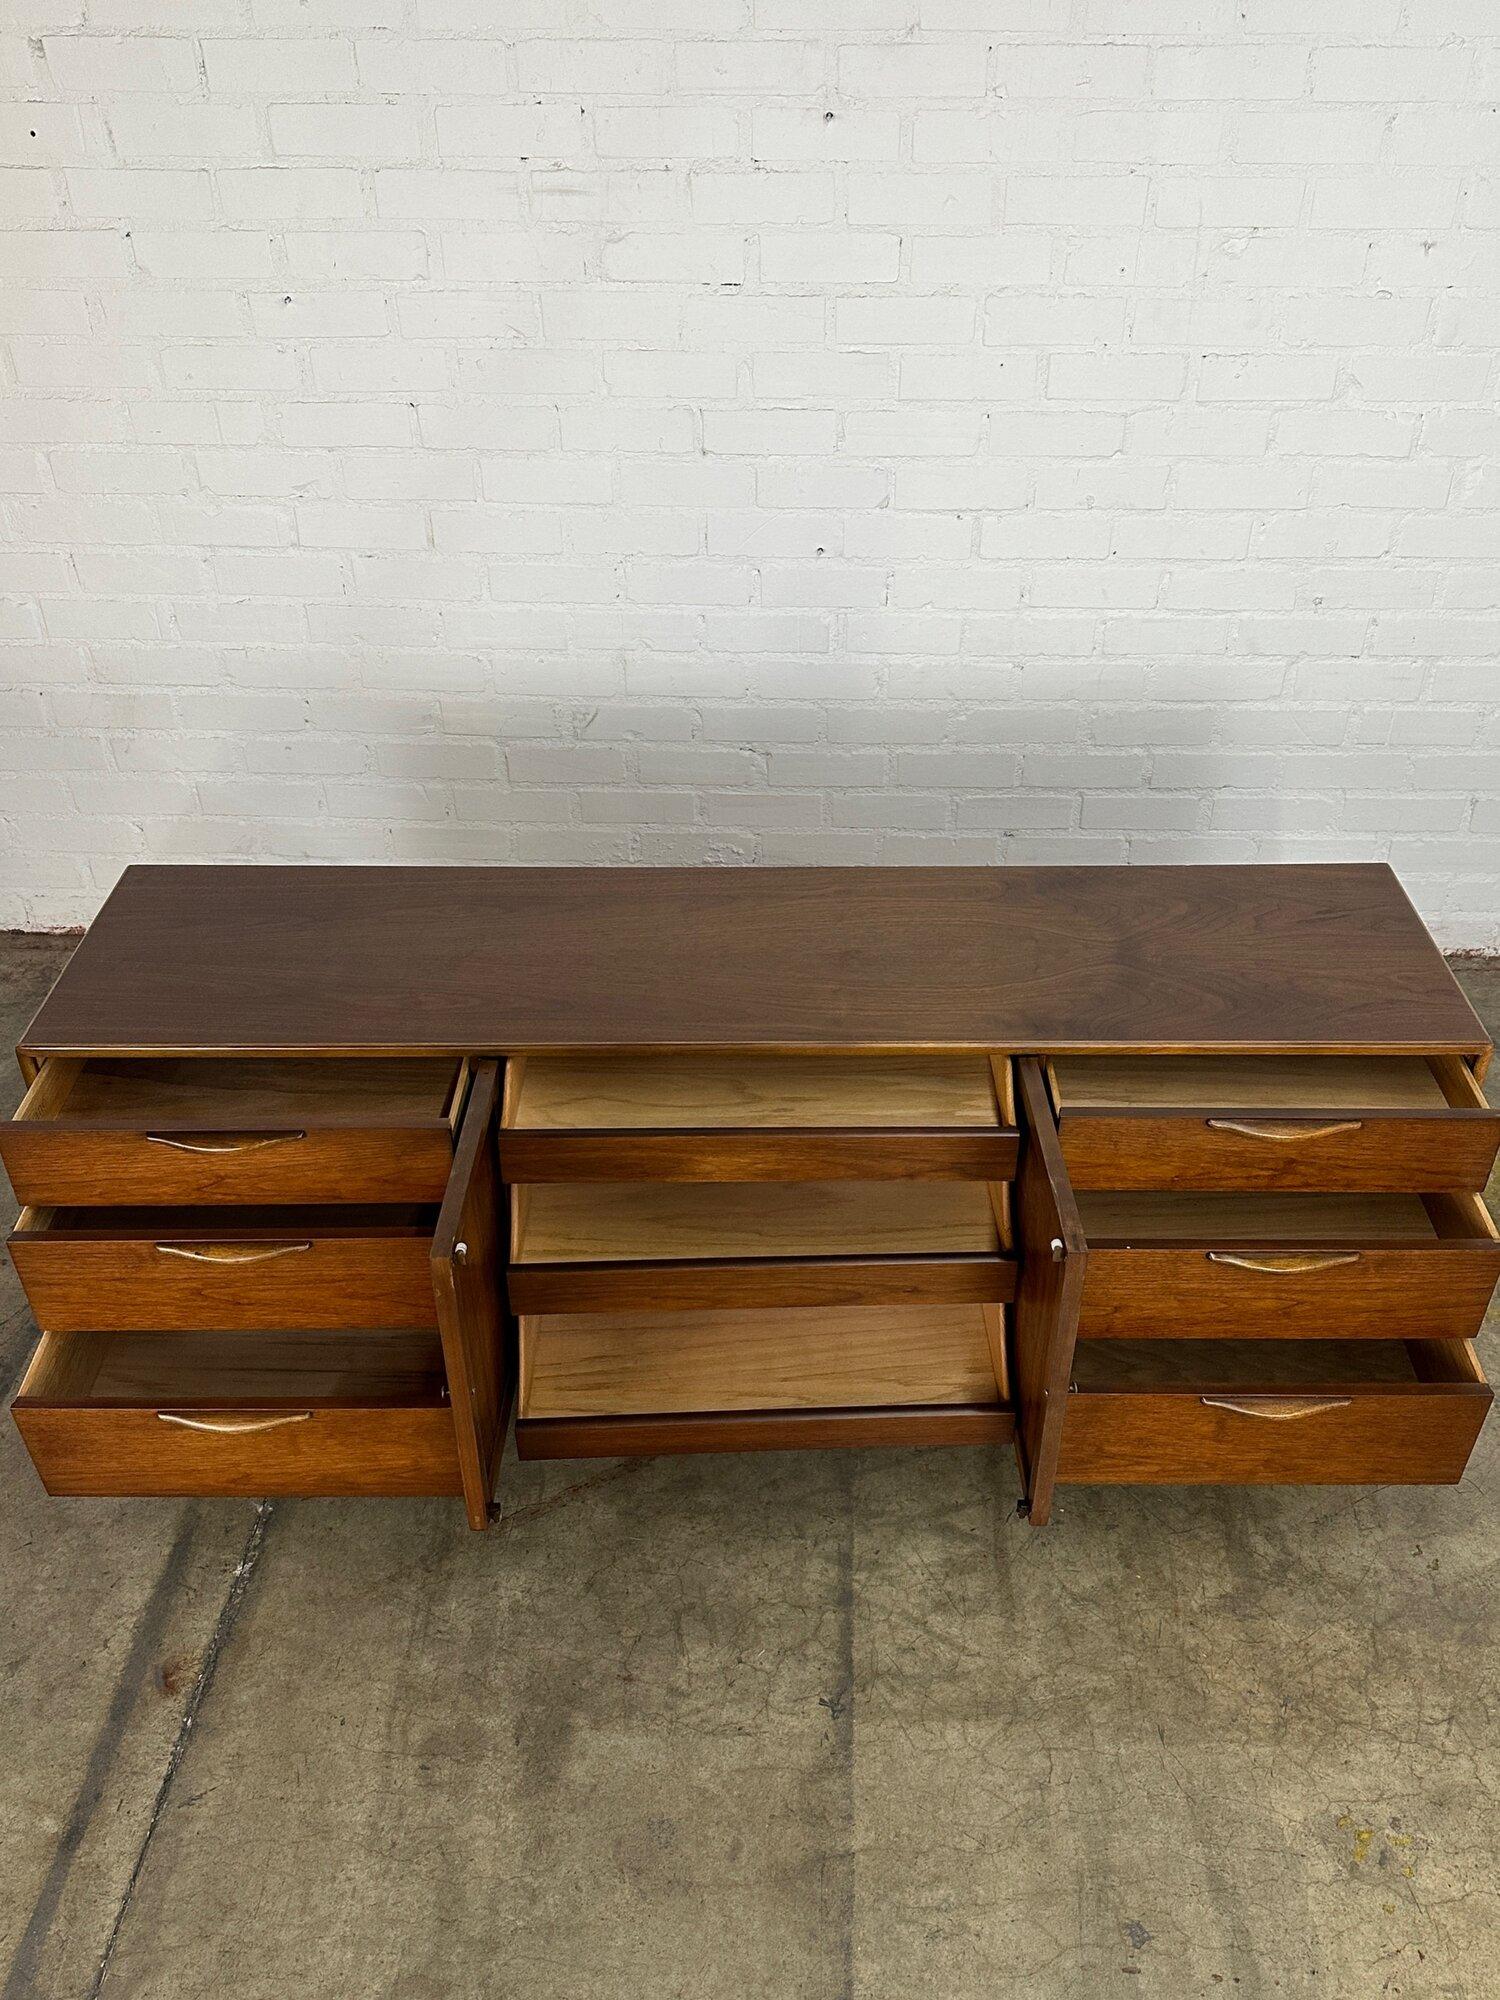 Perception series Walnut Credenza by Lane In Good Condition For Sale In Los Angeles, CA